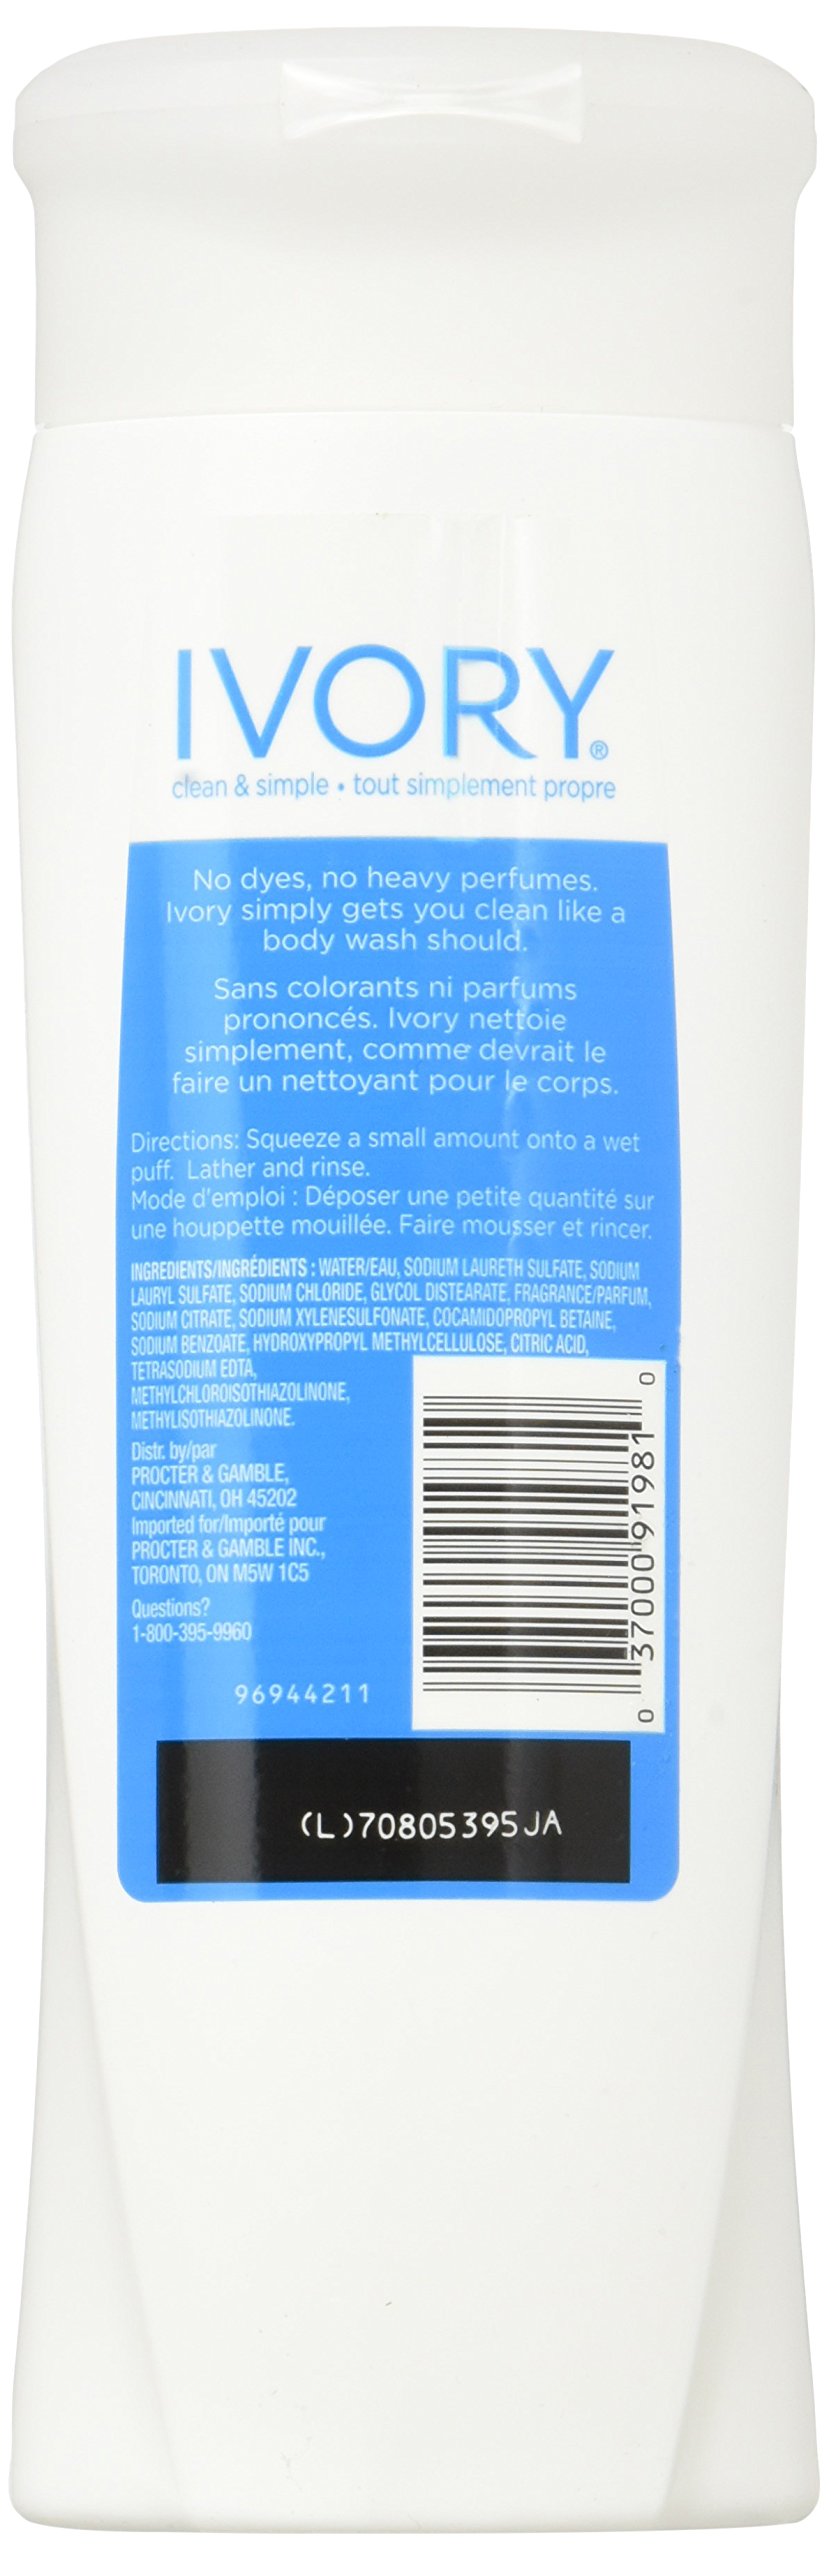 Ivory Body Wash, Original, 12 Ounces (Pack of 3) from Ivory